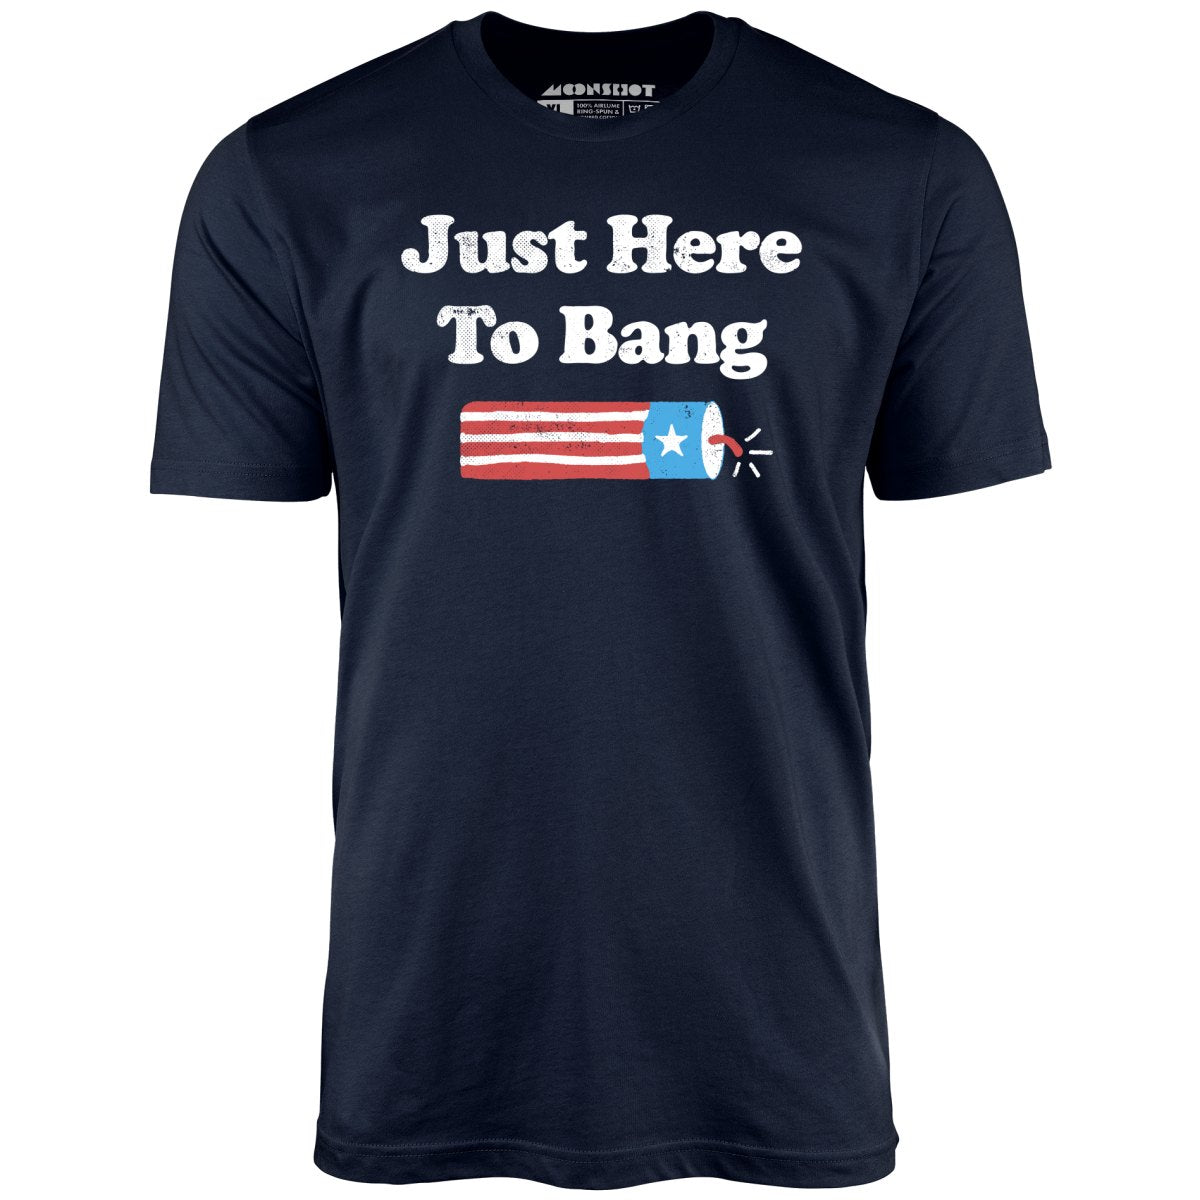 Just Here to Bang - Unisex T-Shirt